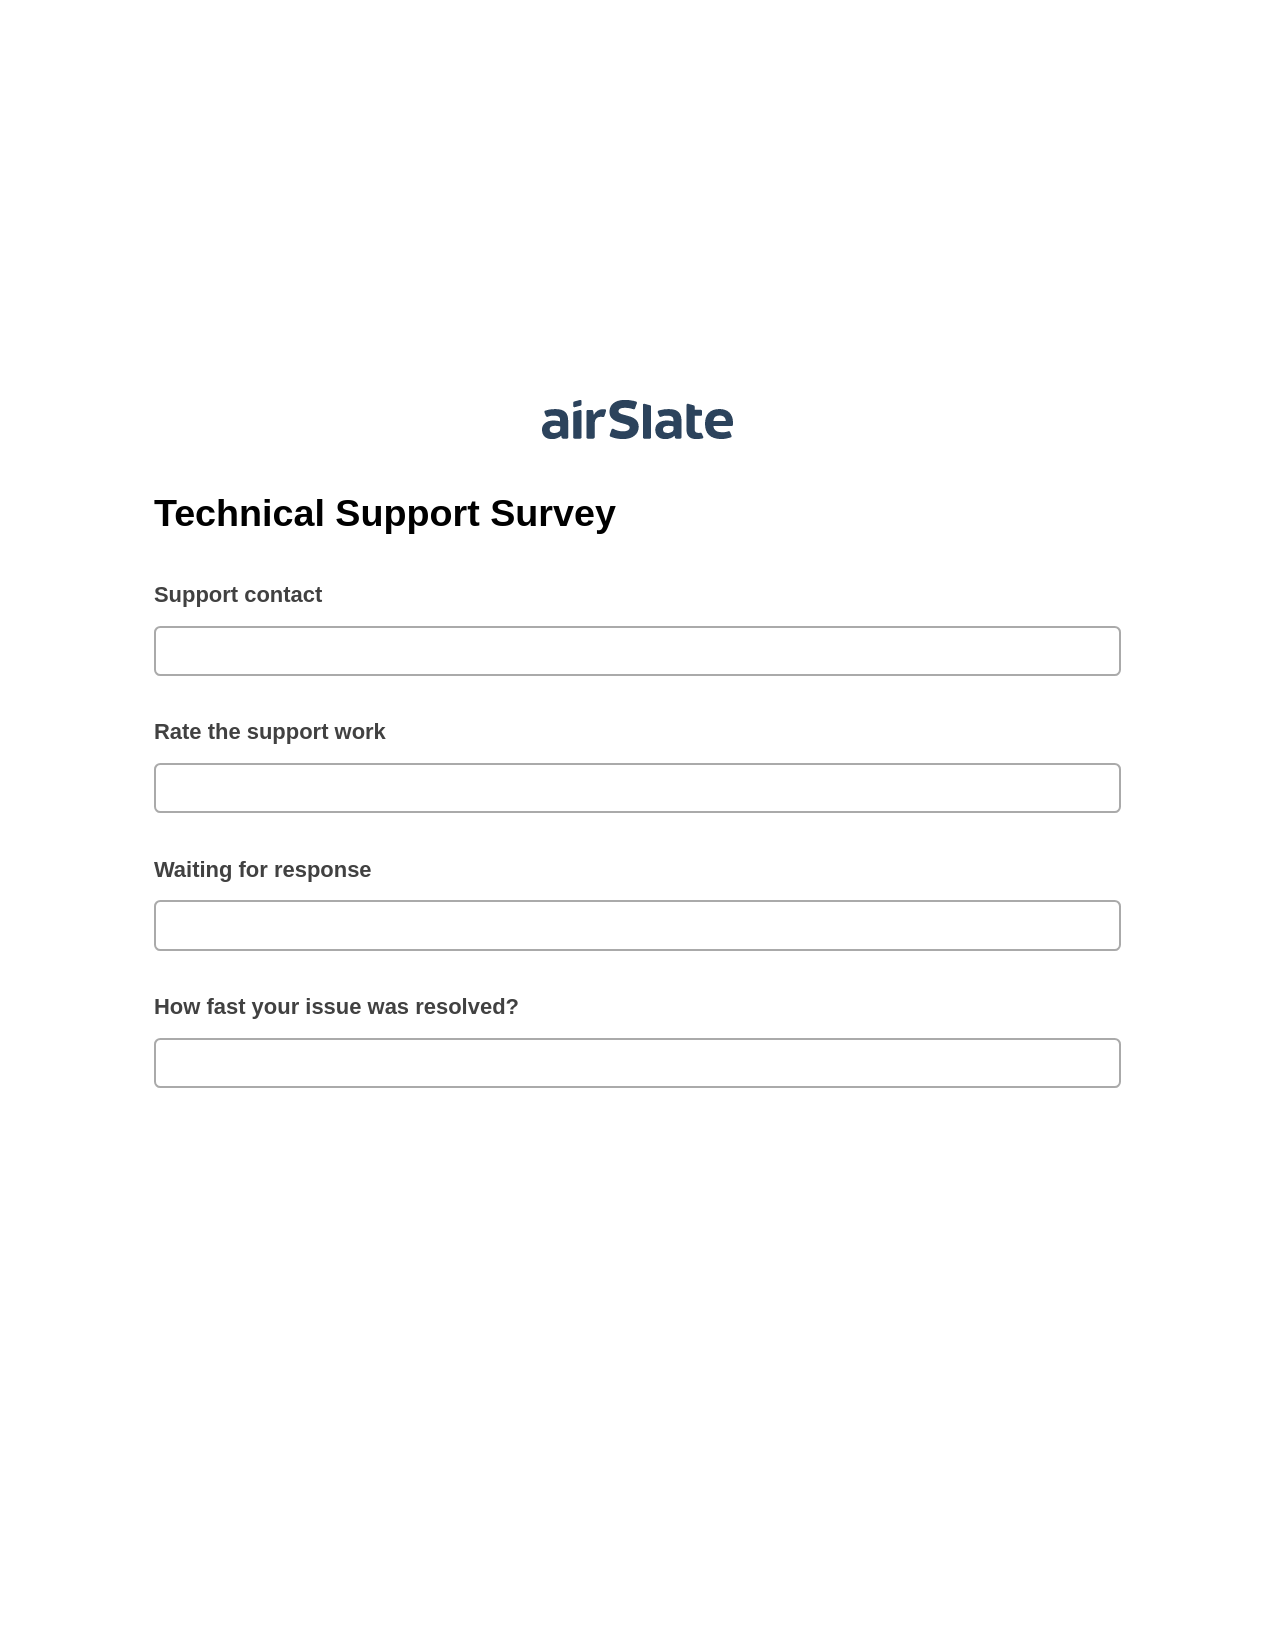 Multirole Technical Support Survey Pre-fill from Salesforce Records with SOQL Bot, Create slate from another Flow Bot, Export to Excel 365 Bot